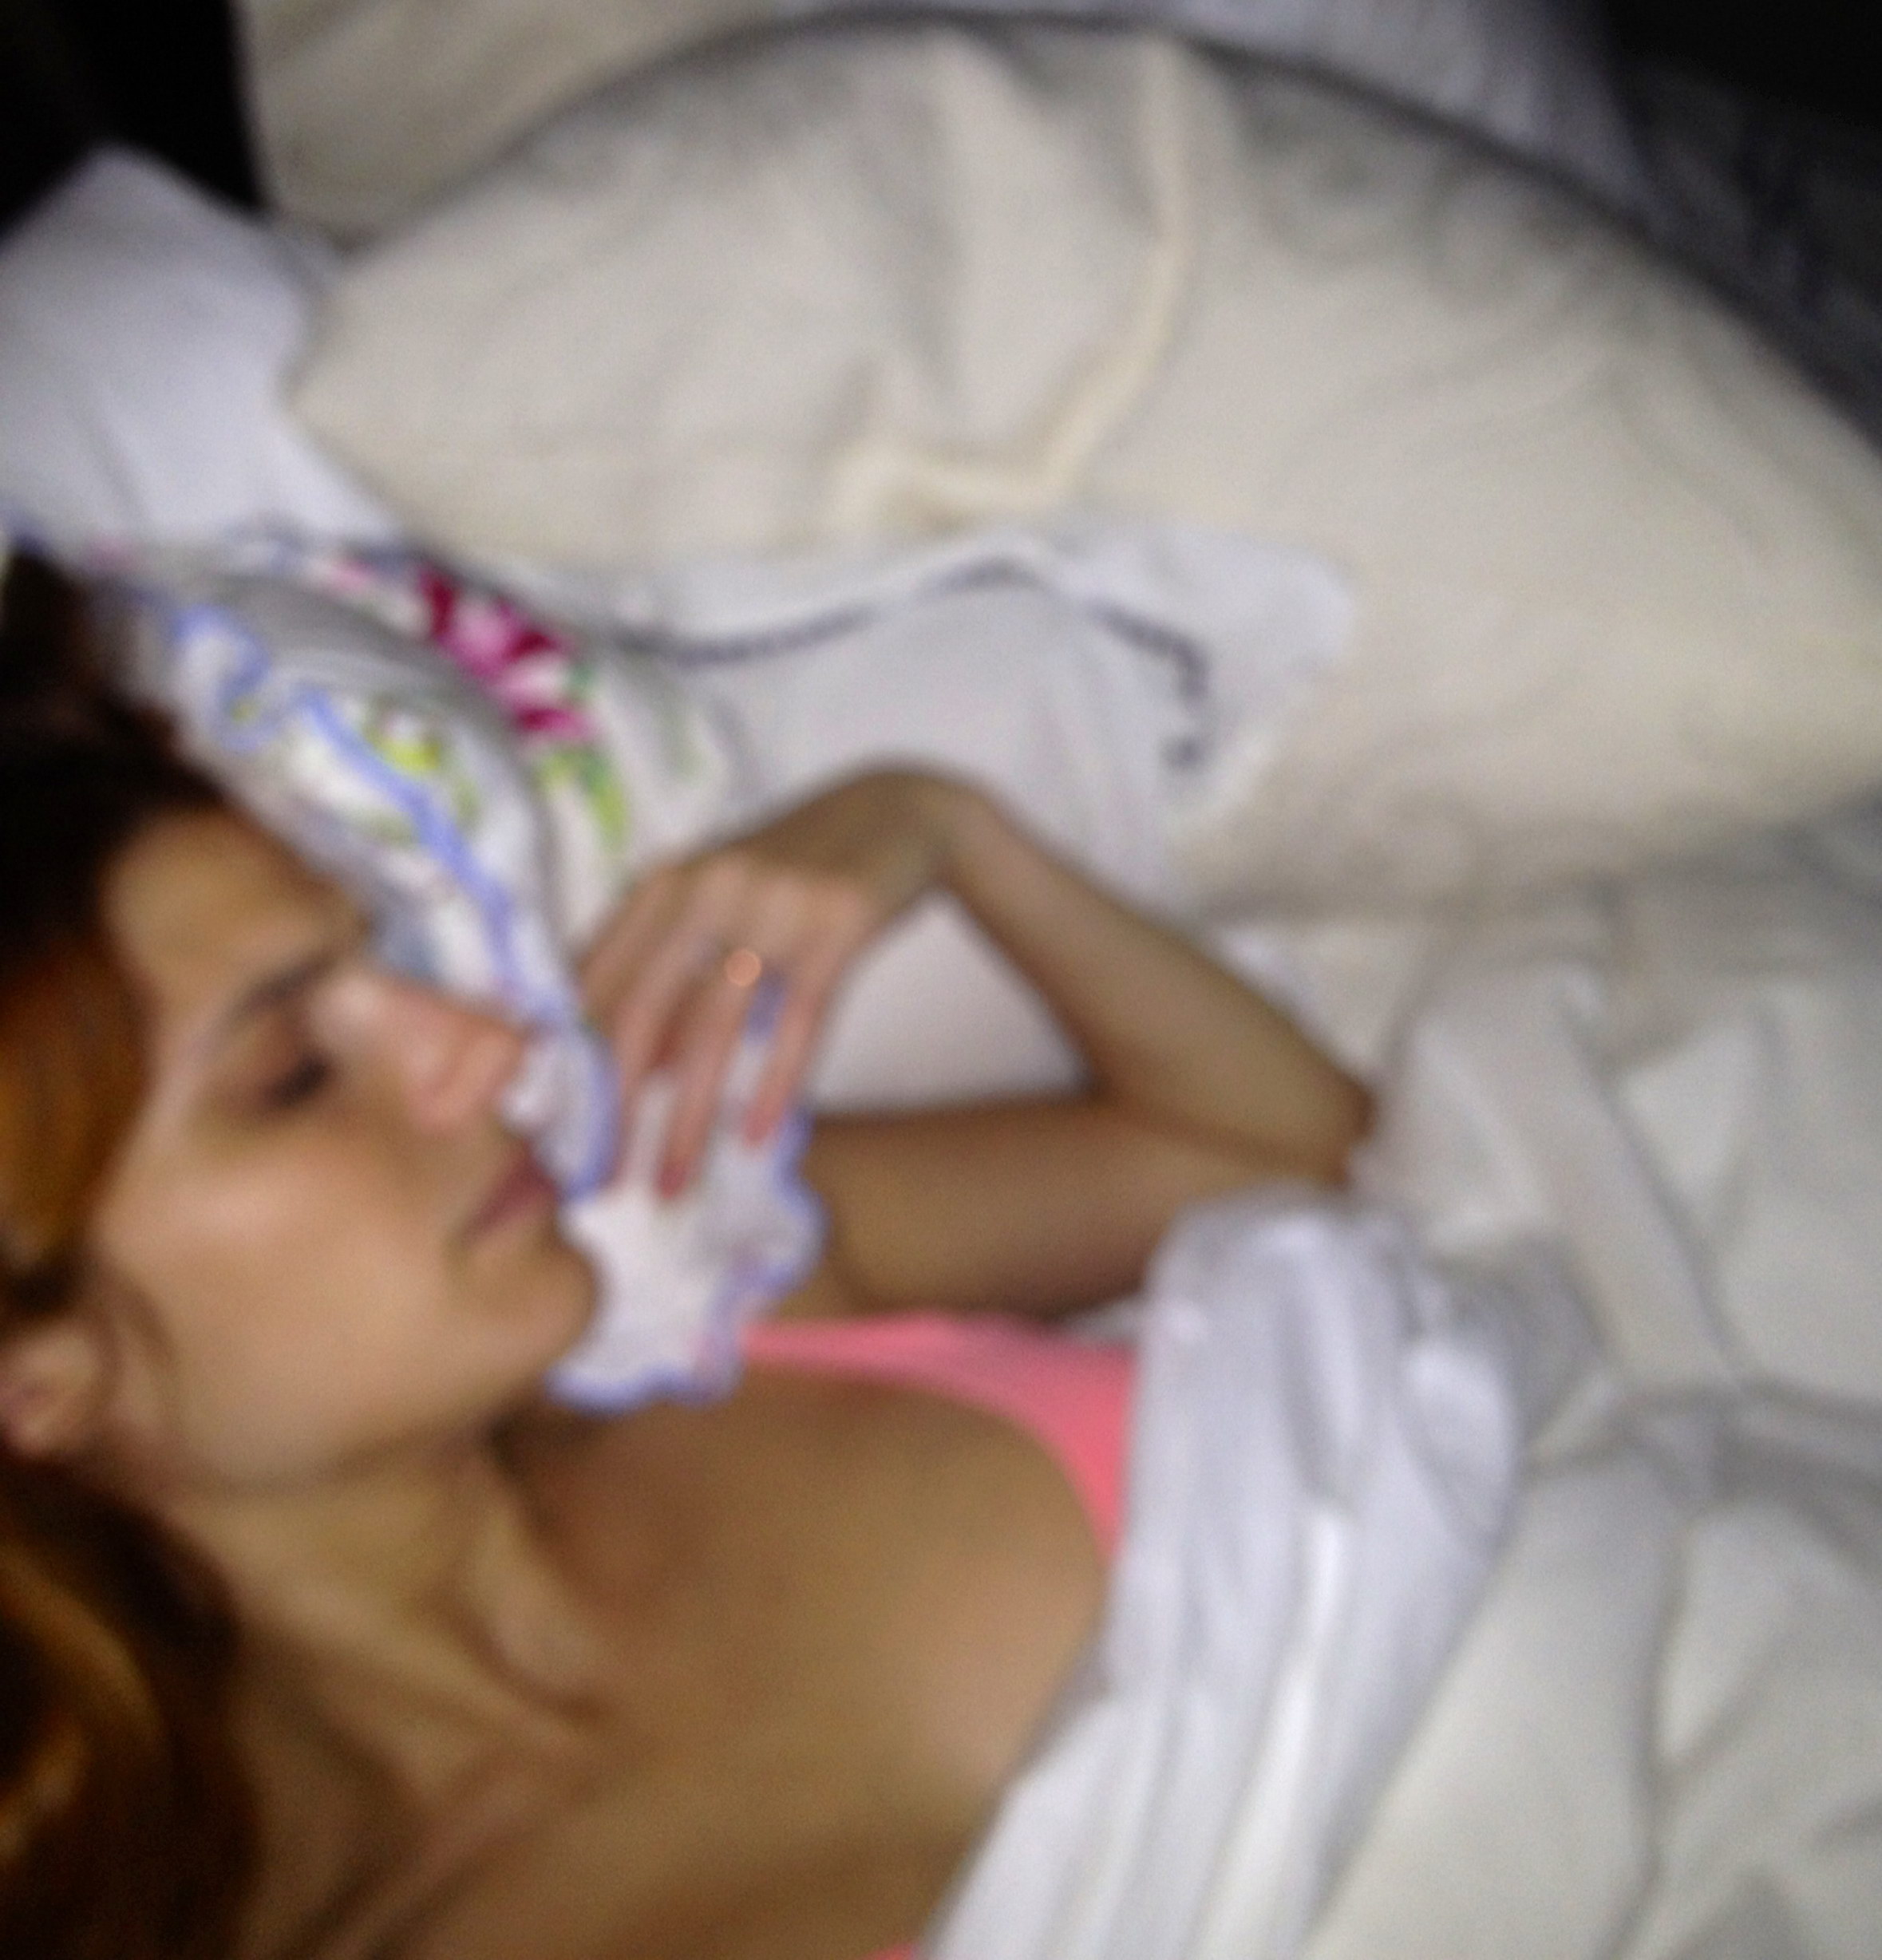 Lake_Bell_leaked_private_nude_photo_hacked_personal_naked_pics_24x_MixQ_26.jpg